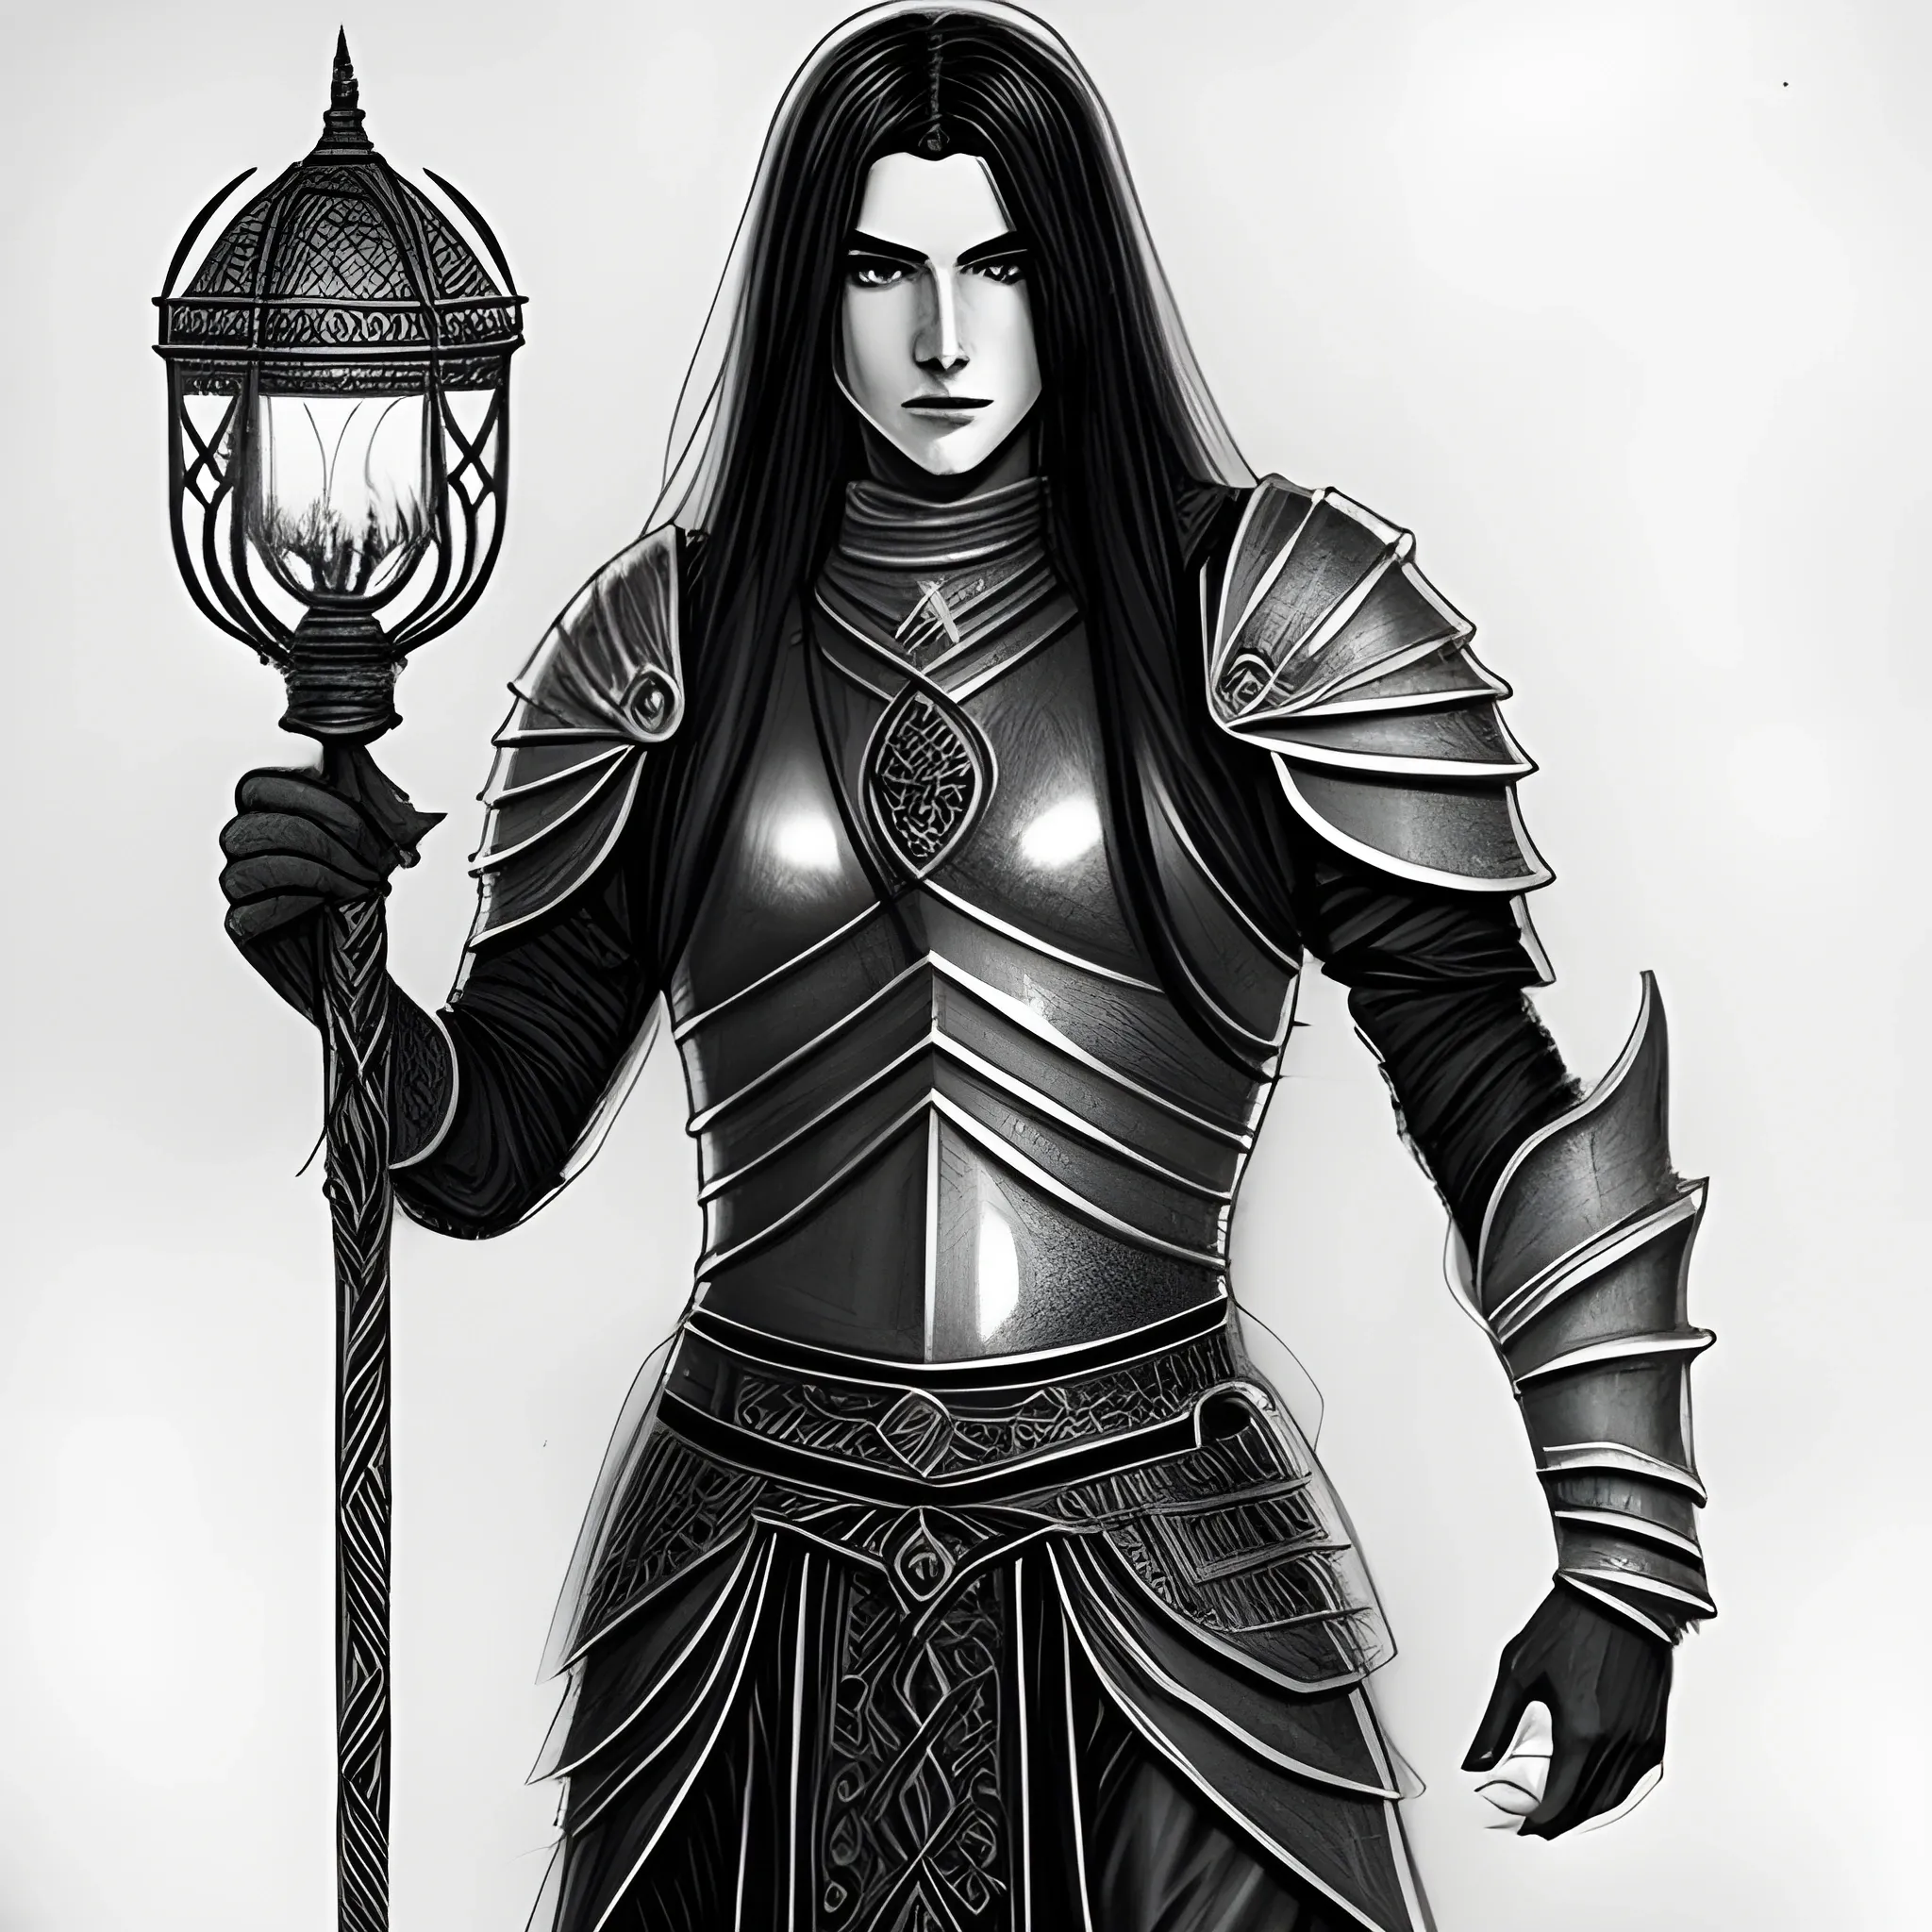 long black haired, male, aasimar, wearing leather armor, holding a djinni lamp
, Pencil Sketch